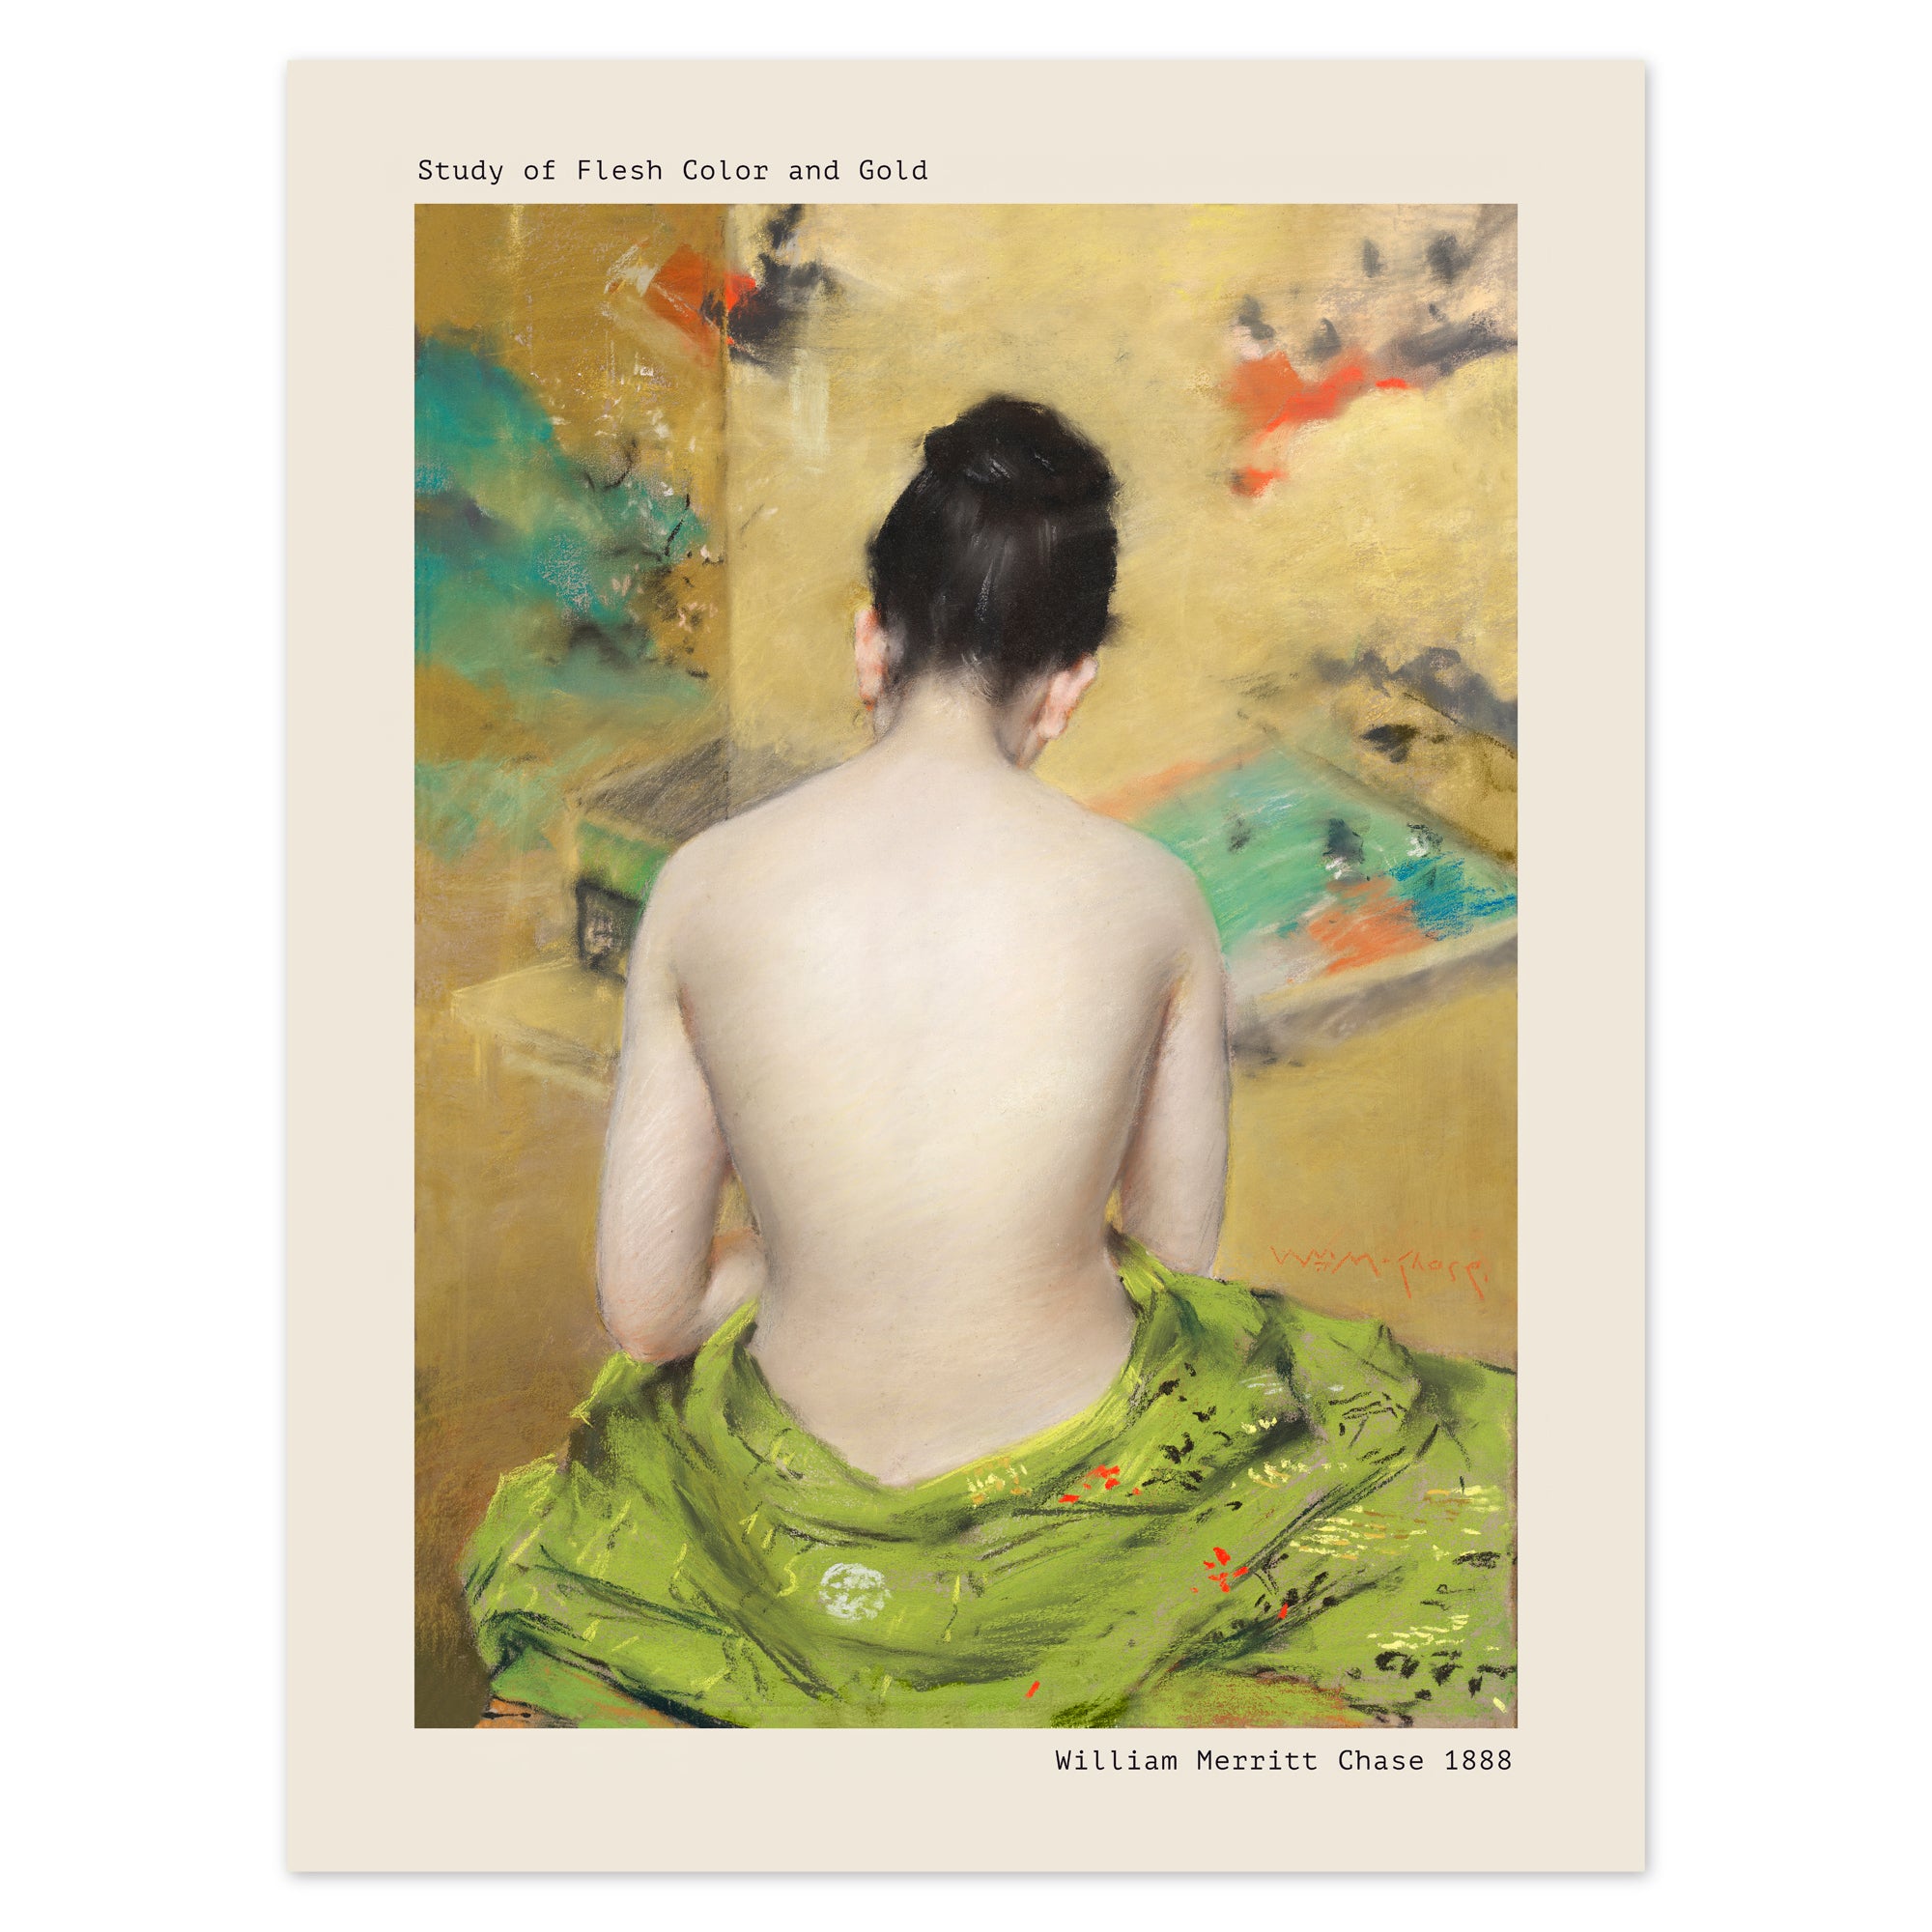 William Merritt Chase Poster - Study of Flesh Color and Gold